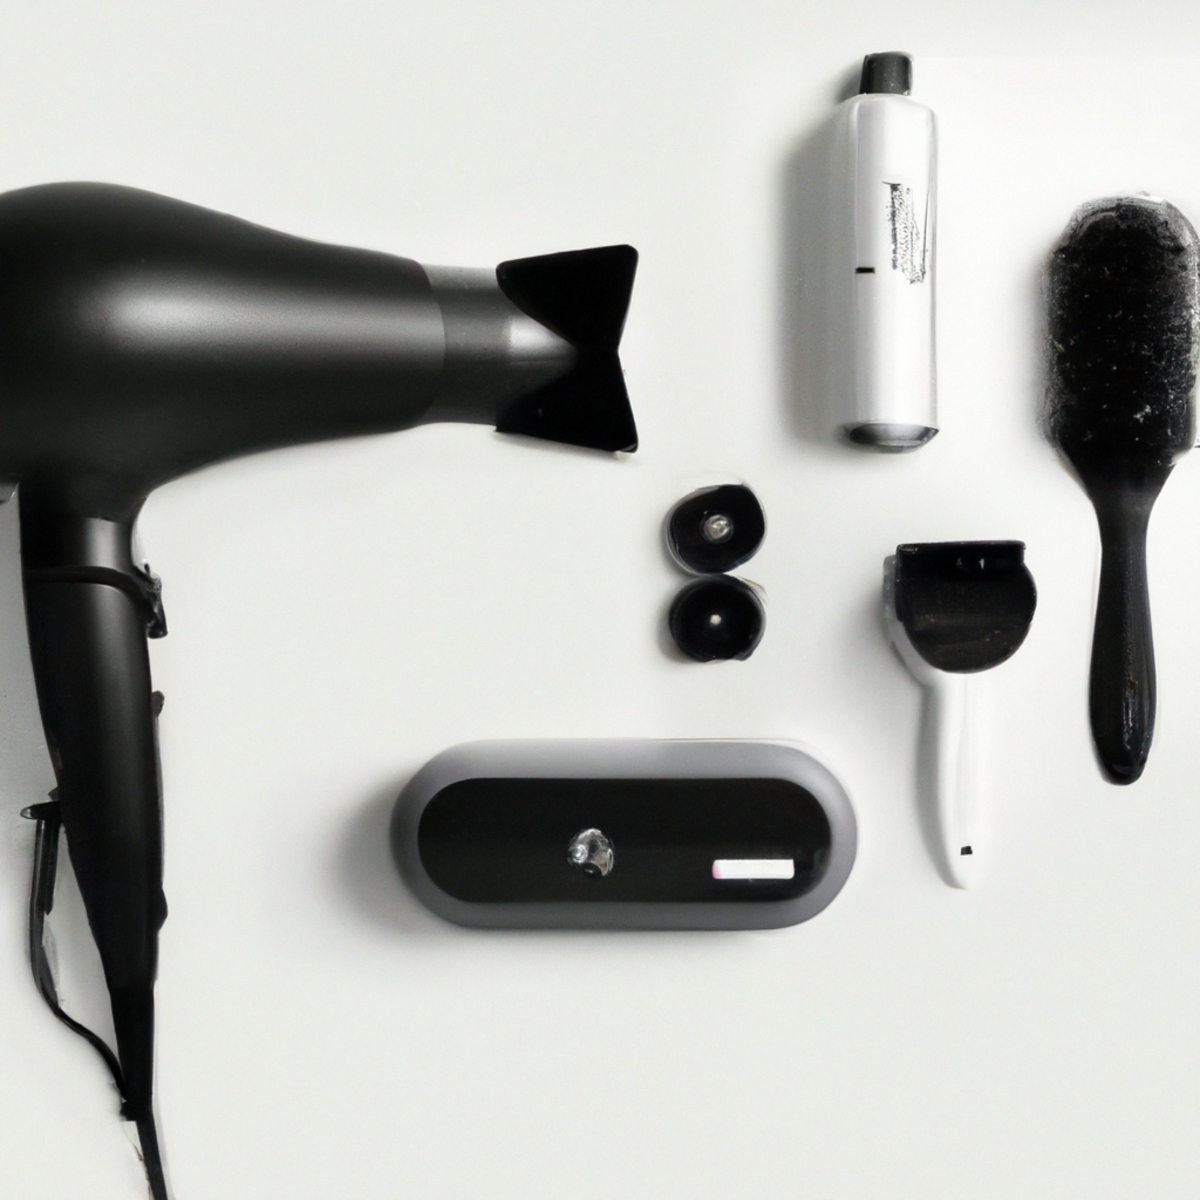 Stylishly arranged self-care products for perfect hair at home, featuring a sleek hairdryer as the focal point.